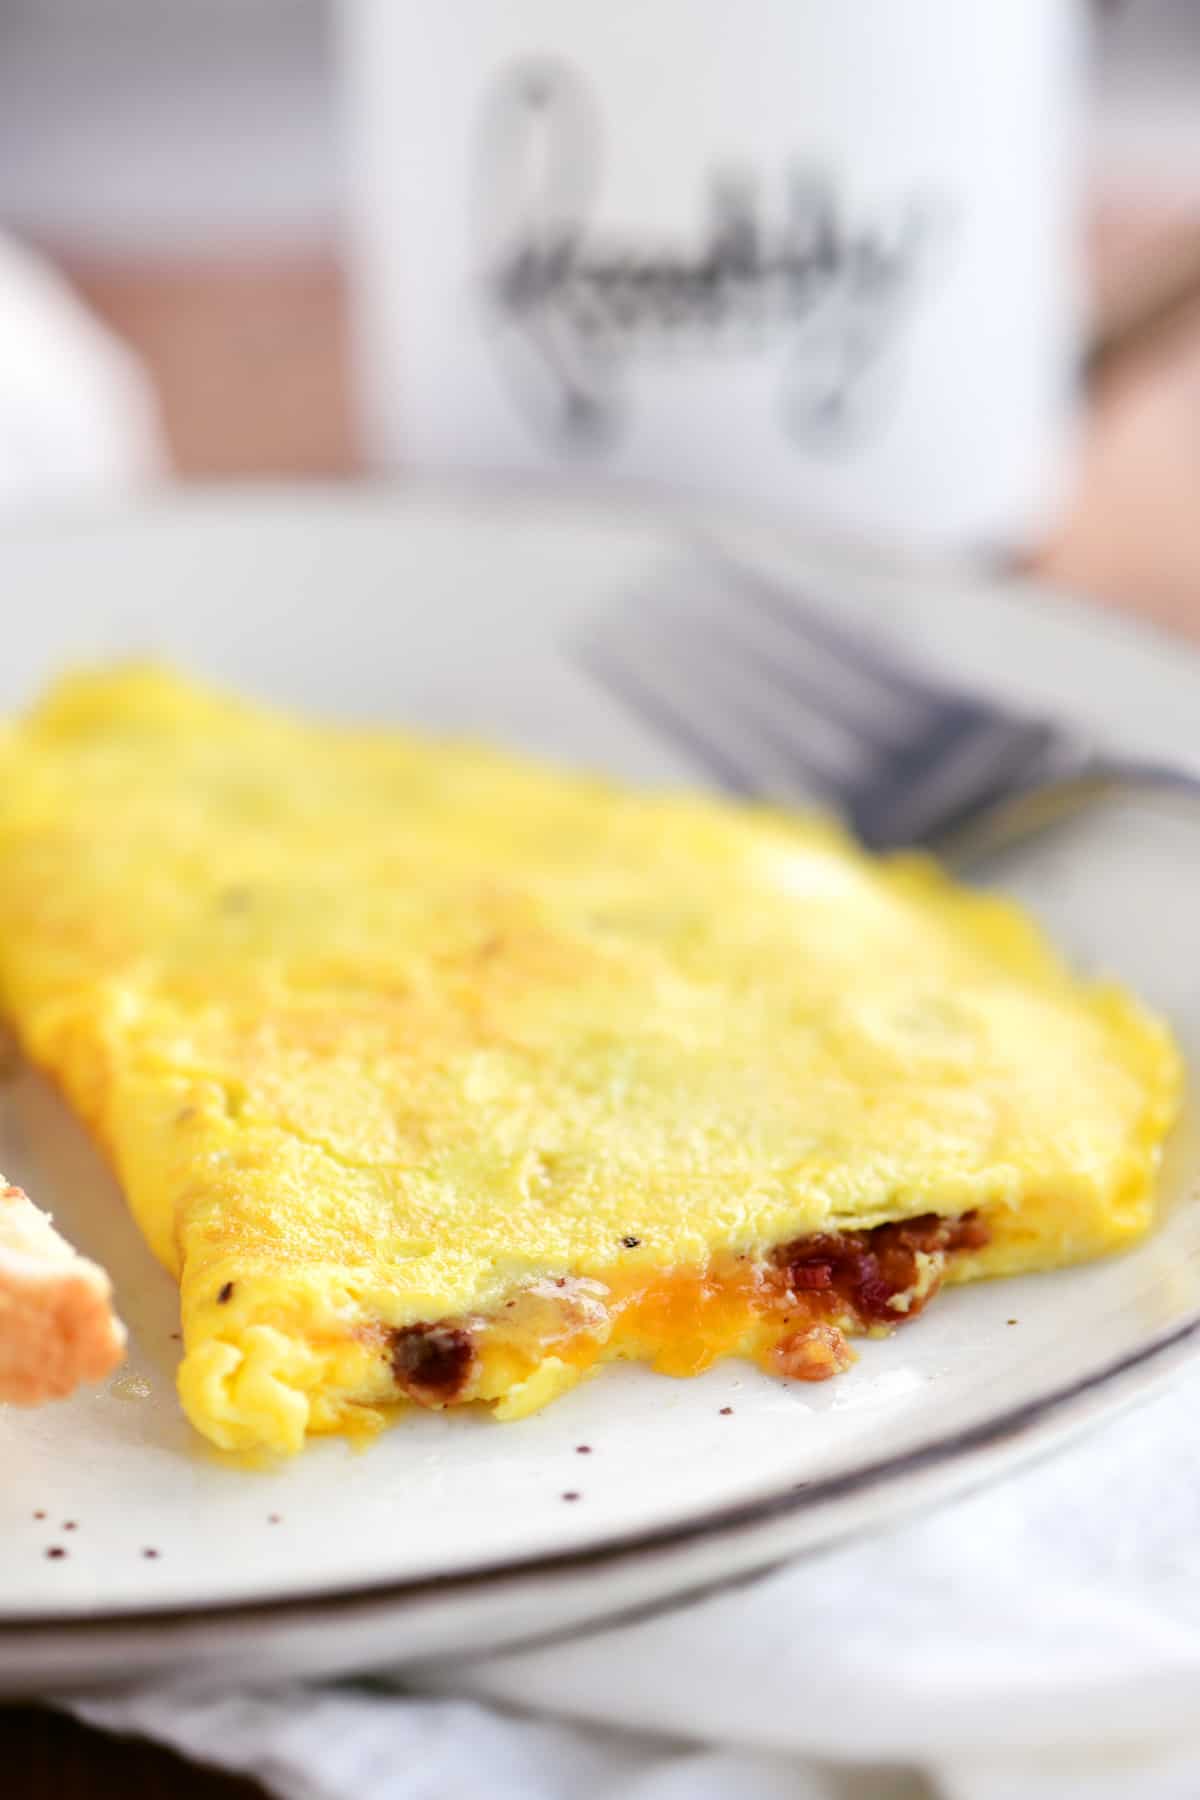 view of the melted cheese and crispy bacon inside the omelet